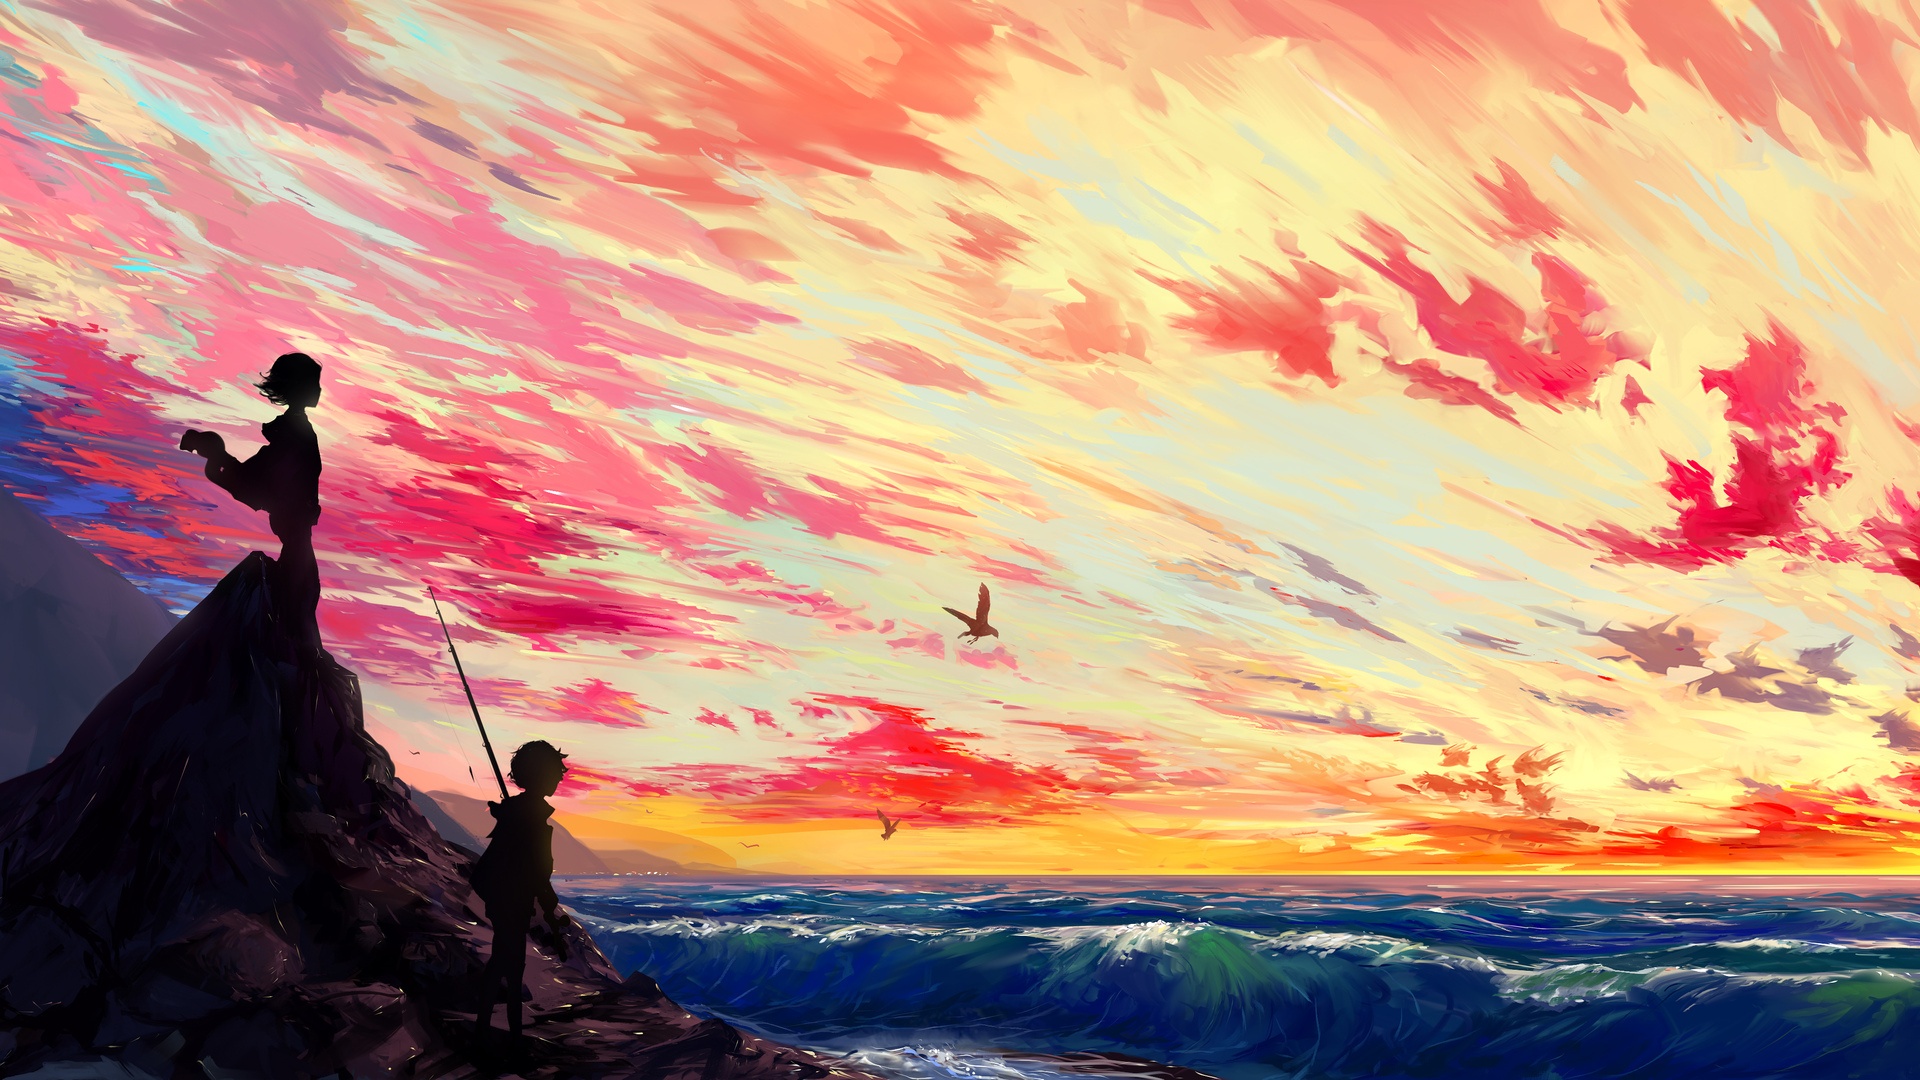 Anime Landscape With Clouds free background